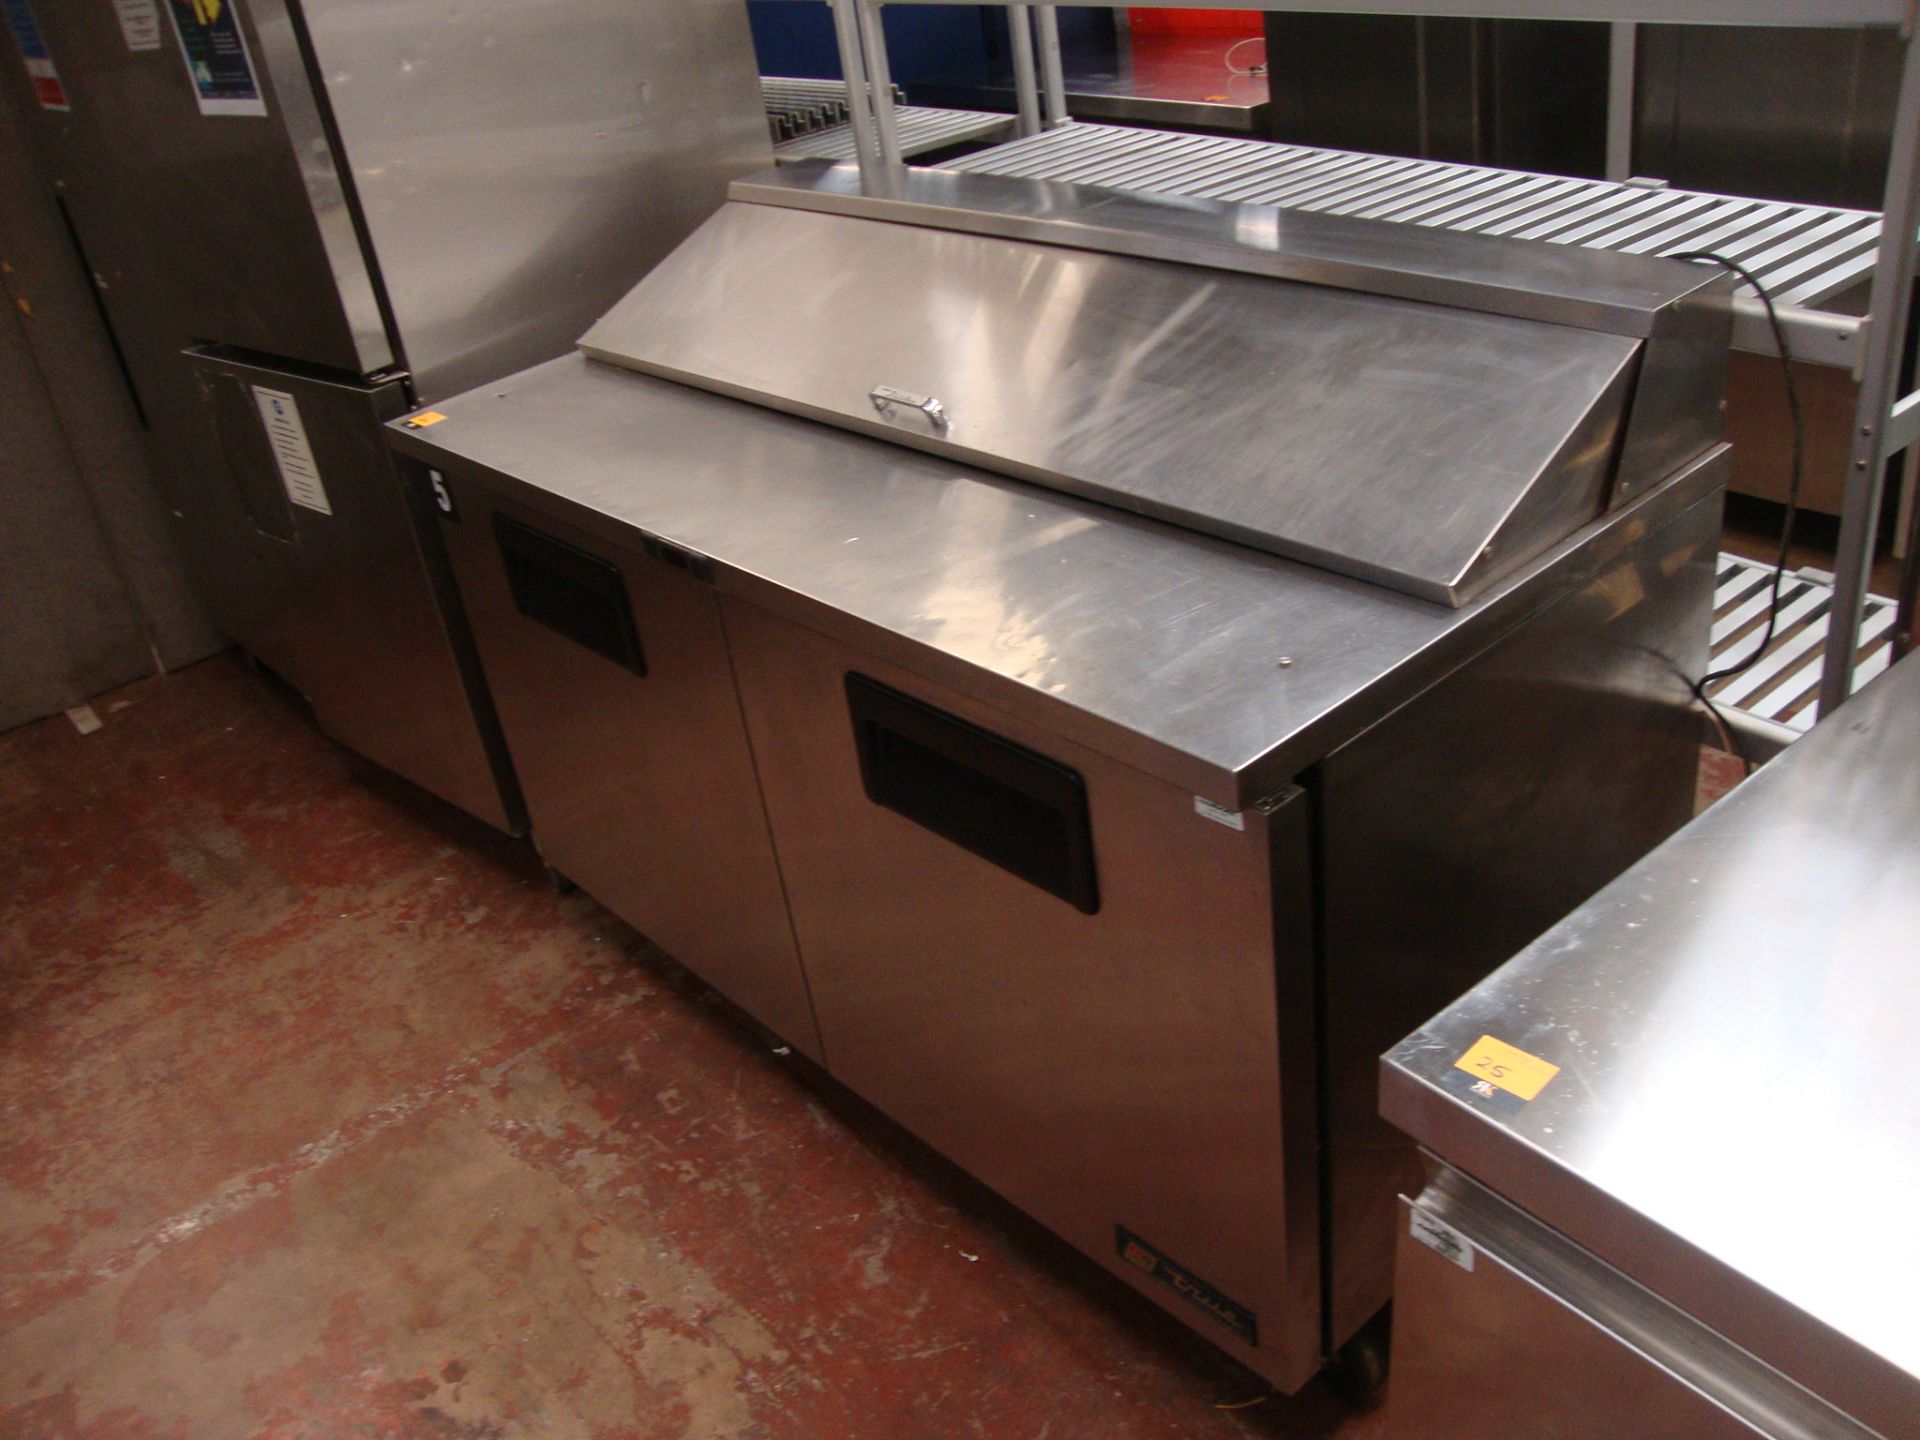 True model TSSU60-16 stainless steel mobile refrigerated unit with hinged compartment on top for - Image 2 of 5